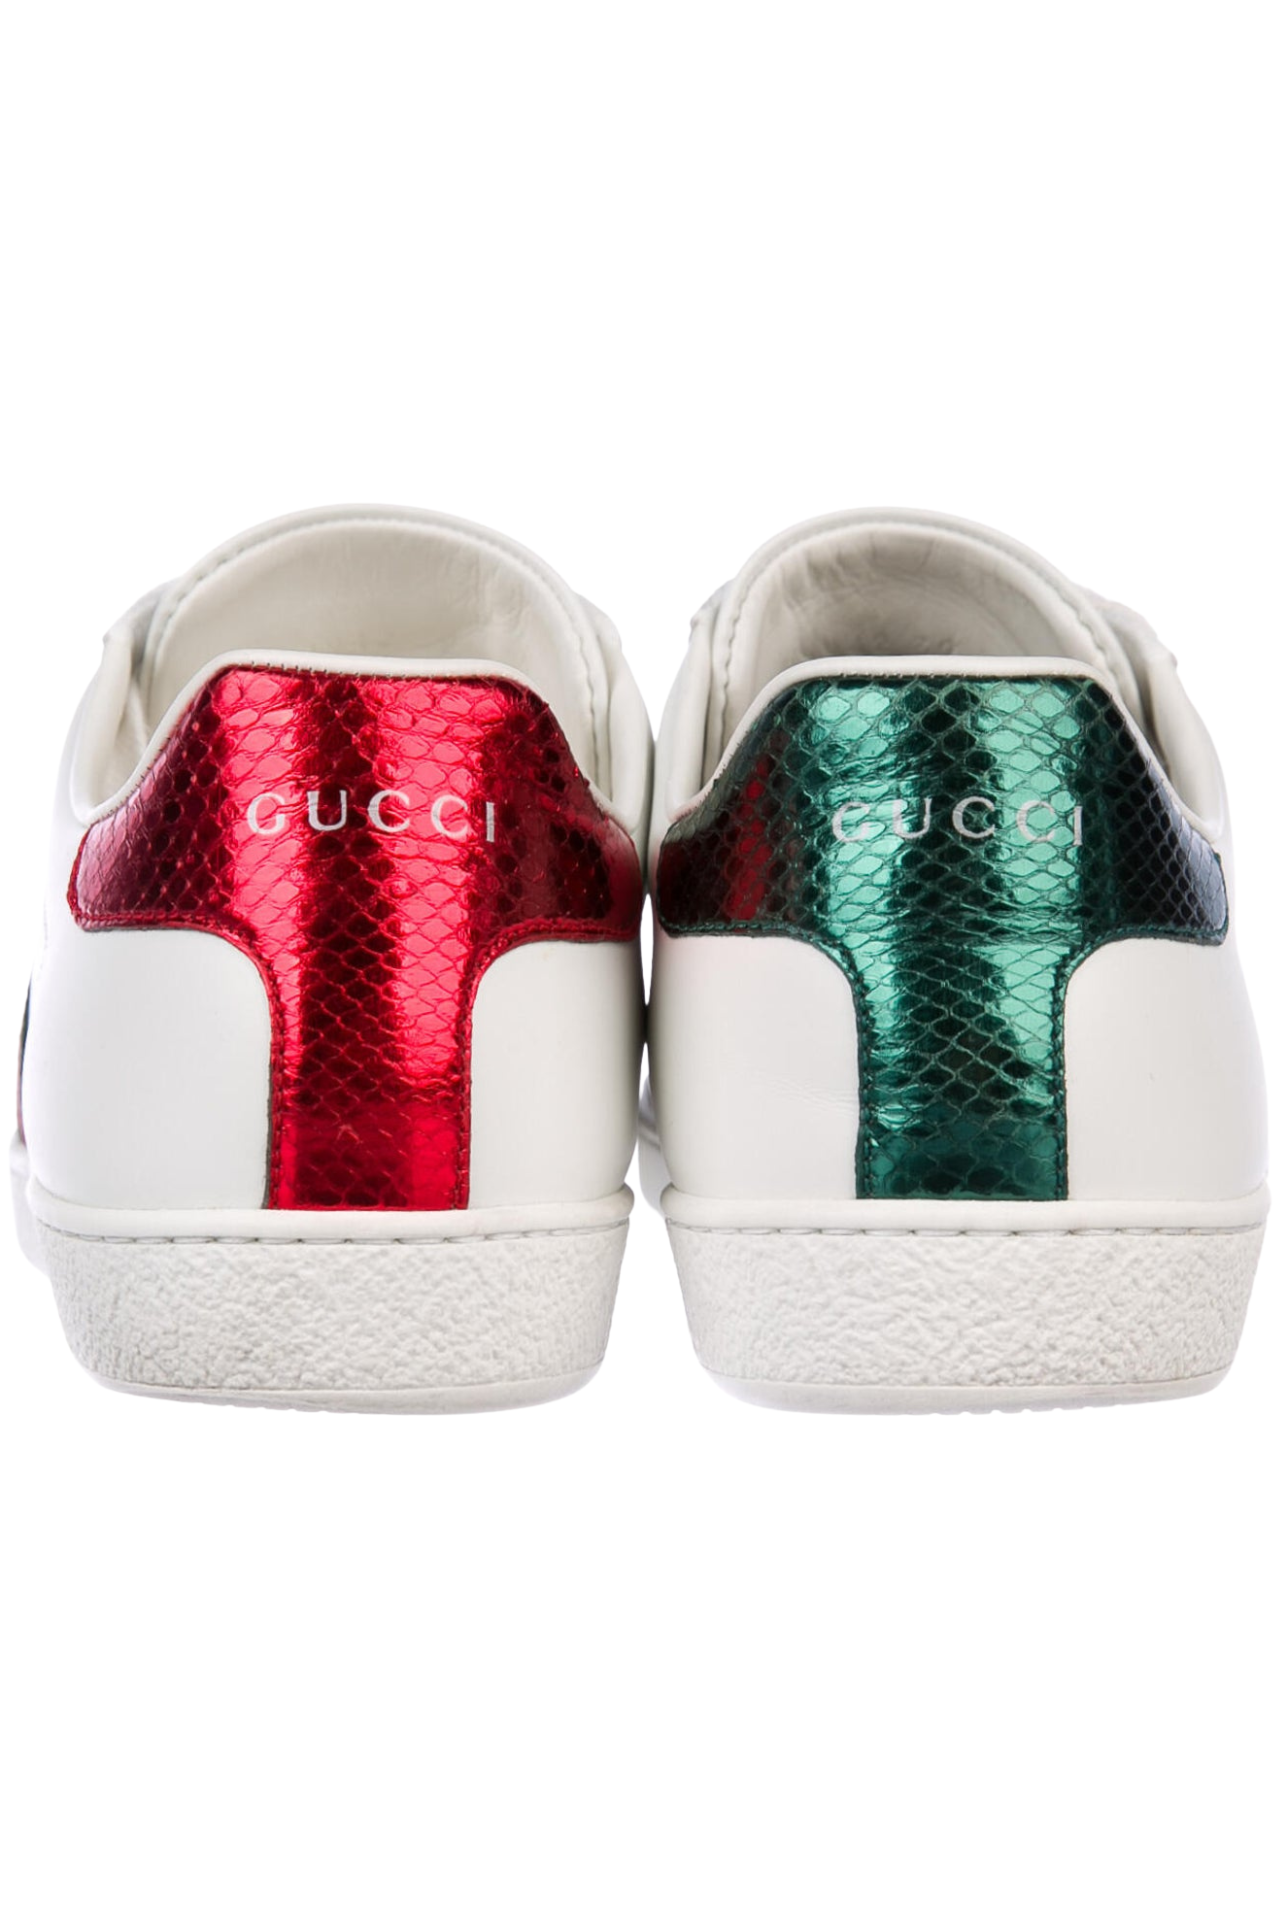 Gucci White Leather And Python Embossed Leather Ace Bee Web Low Top Sneakers EU 35